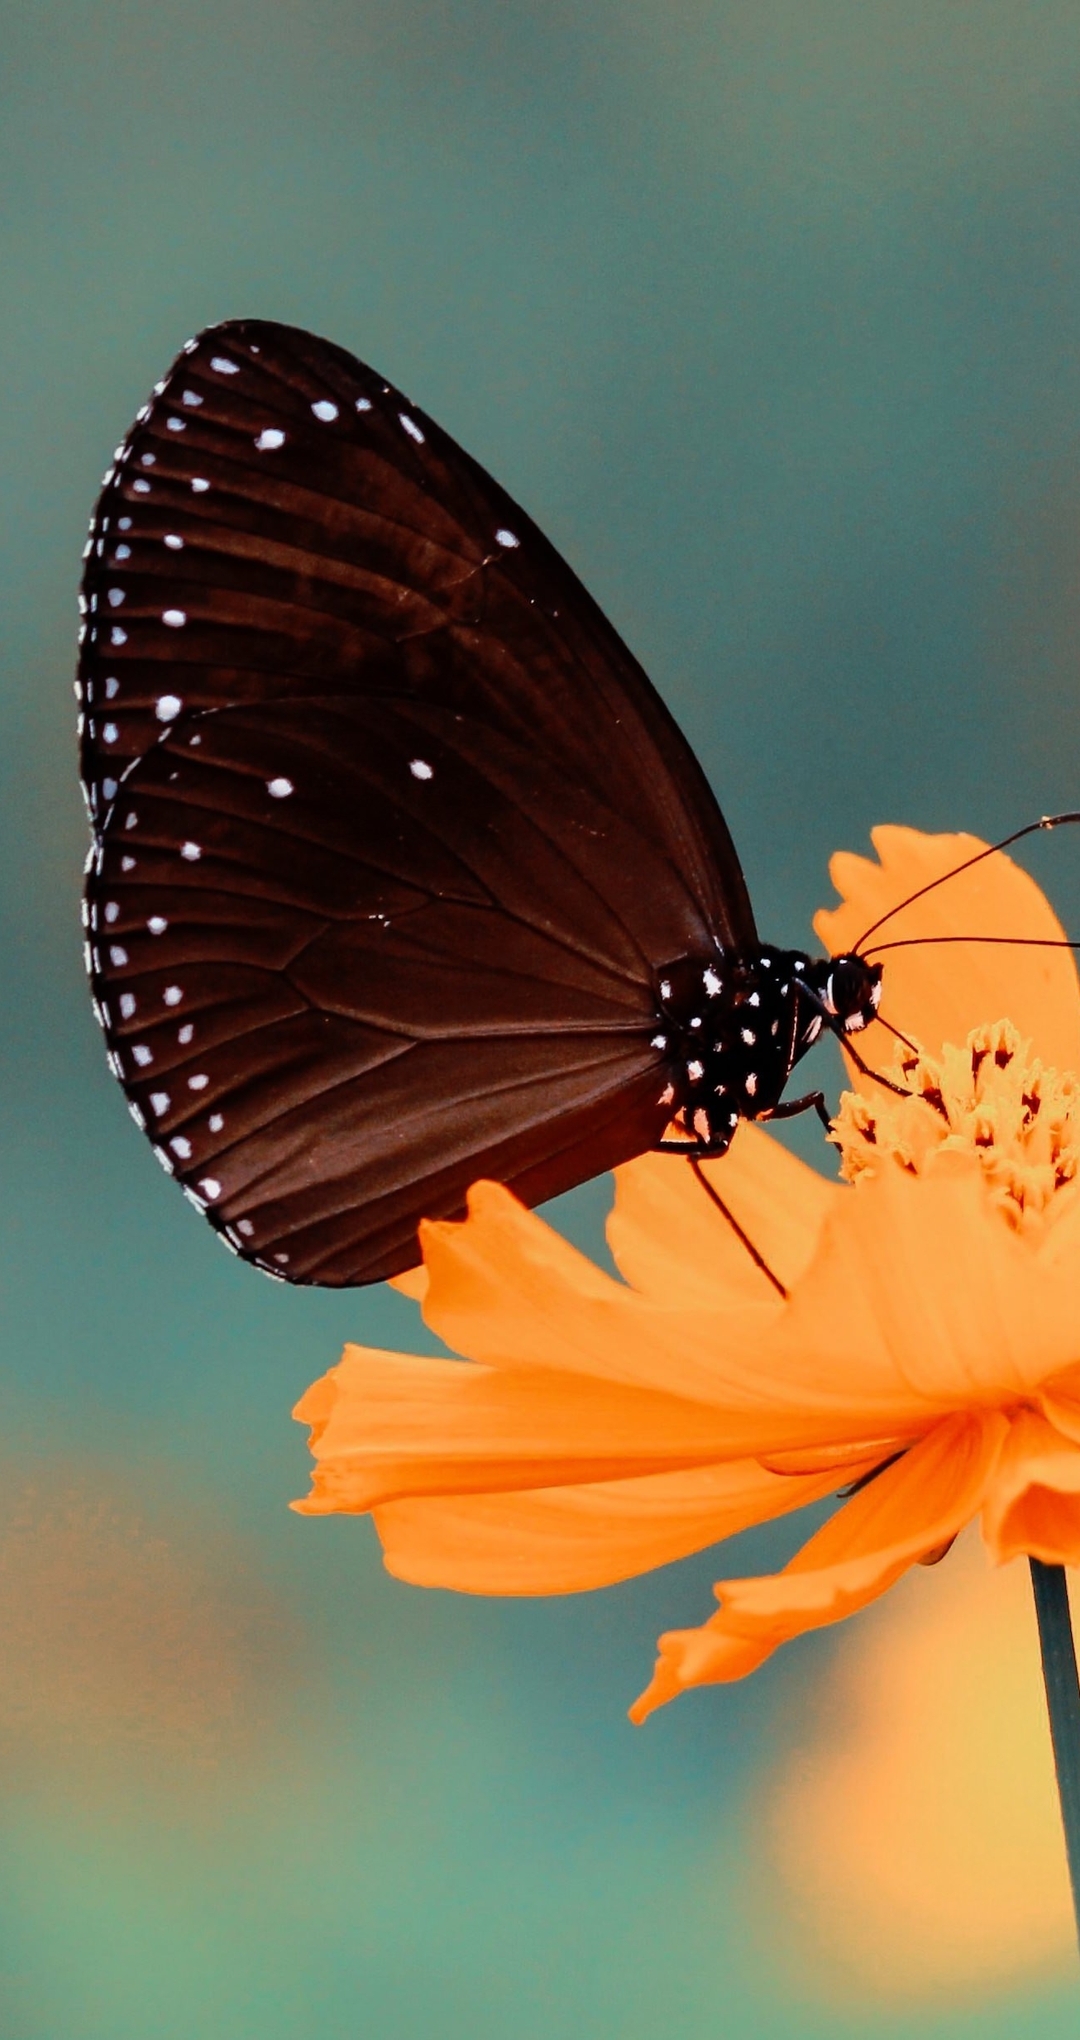 Image: Butterfly, flower, yellow, blurred background